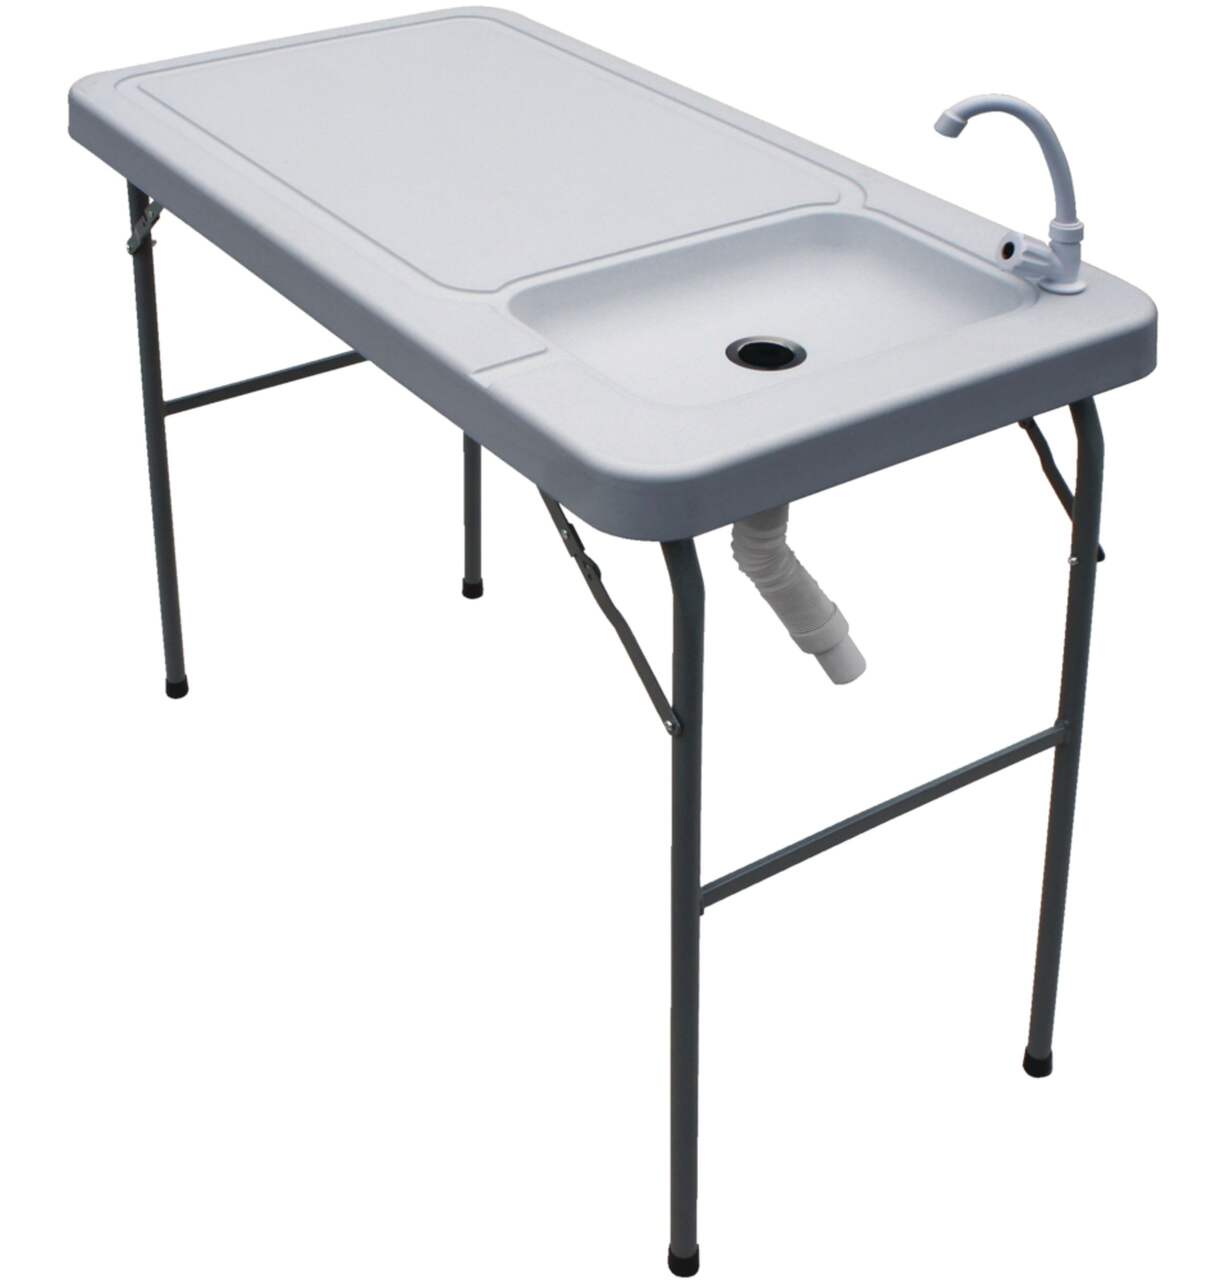 PDG Outdoor Portable Fish & Game Cleaning Table with Built-In Sink